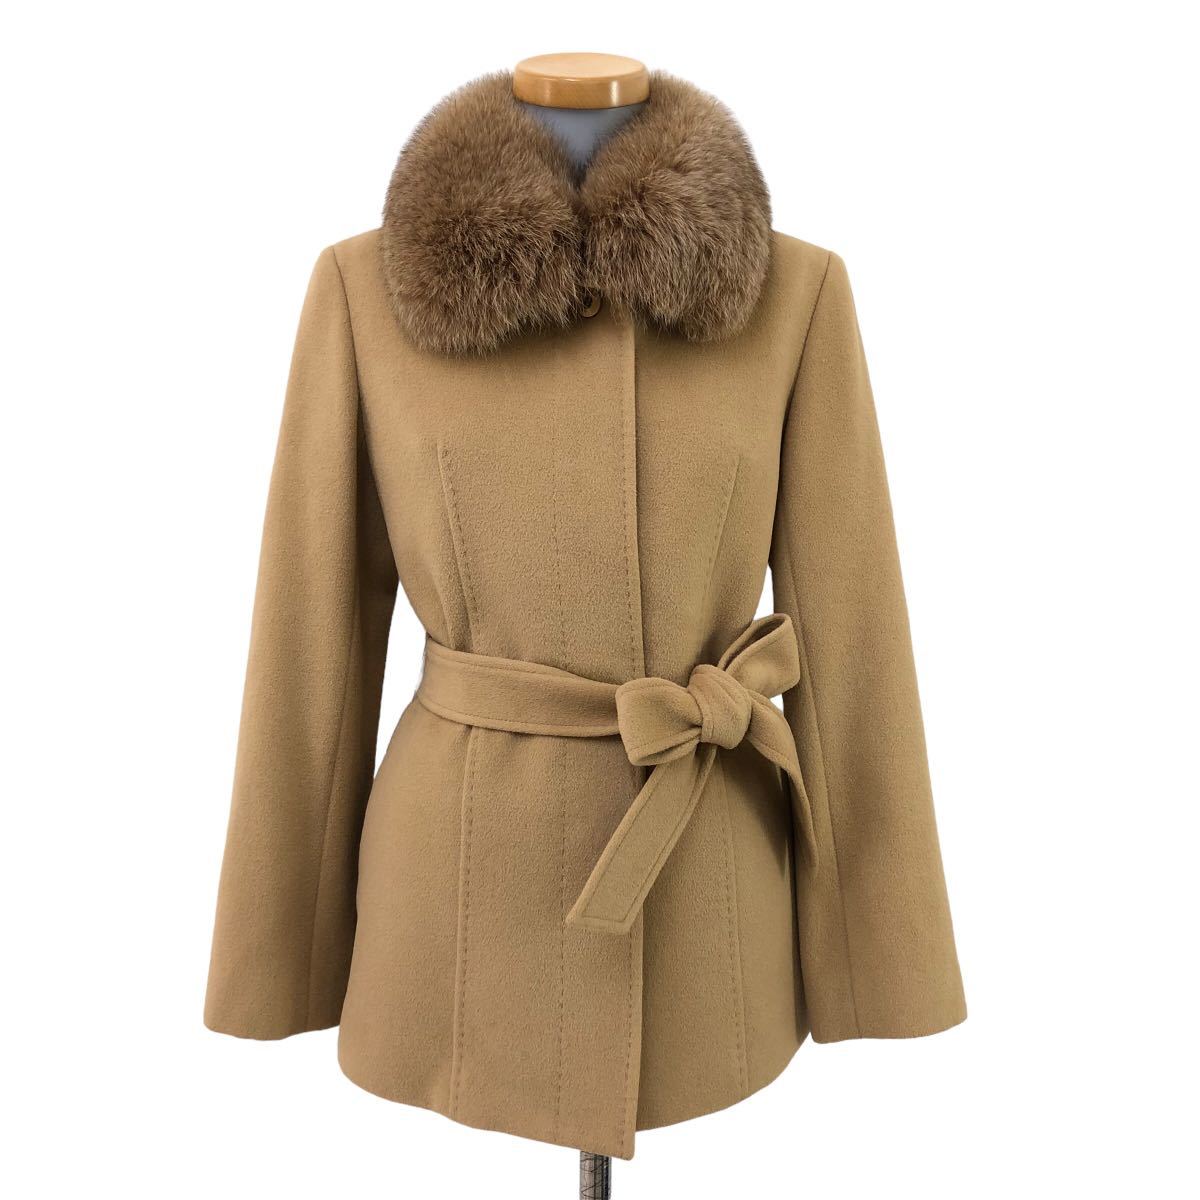 B352 J&R J&R coat fox fur 2way belt attaching outer outer garment feather weave long sleeve Anne gola beige lady's M made in Japan 